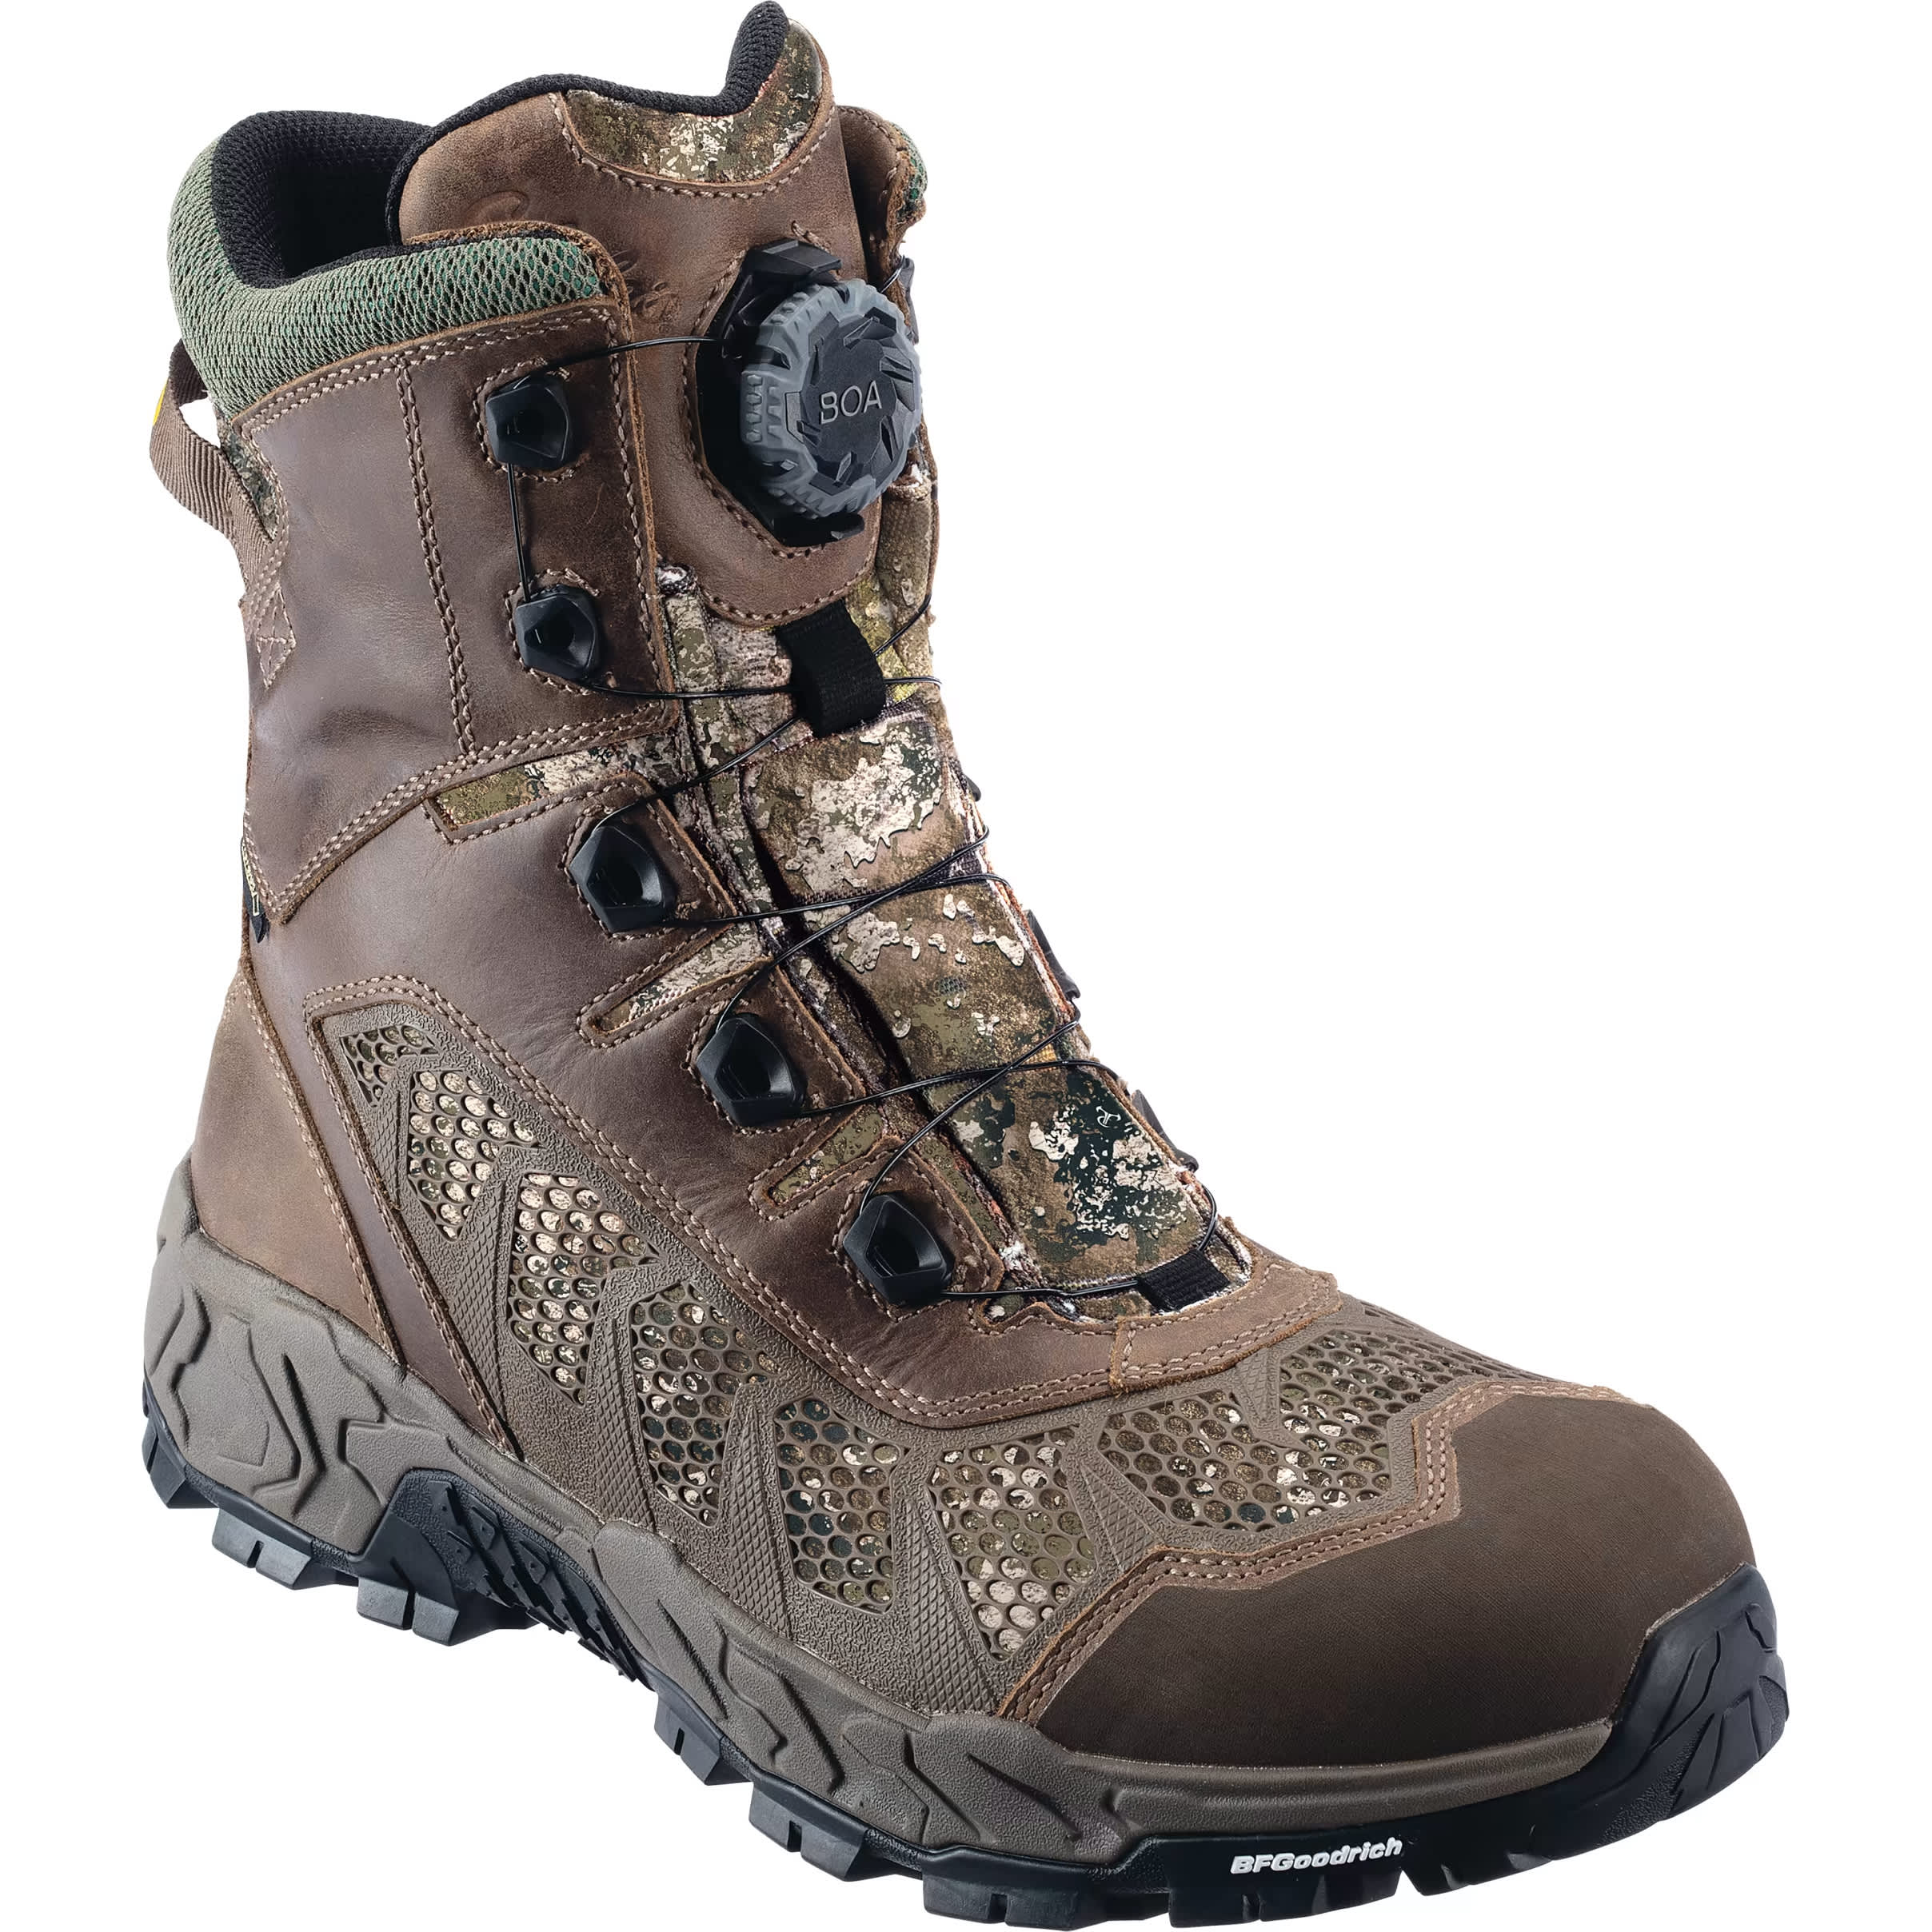 Cabela’s Men’s Treadfast BOA GORE-TEX Insulated Hunting Boots 